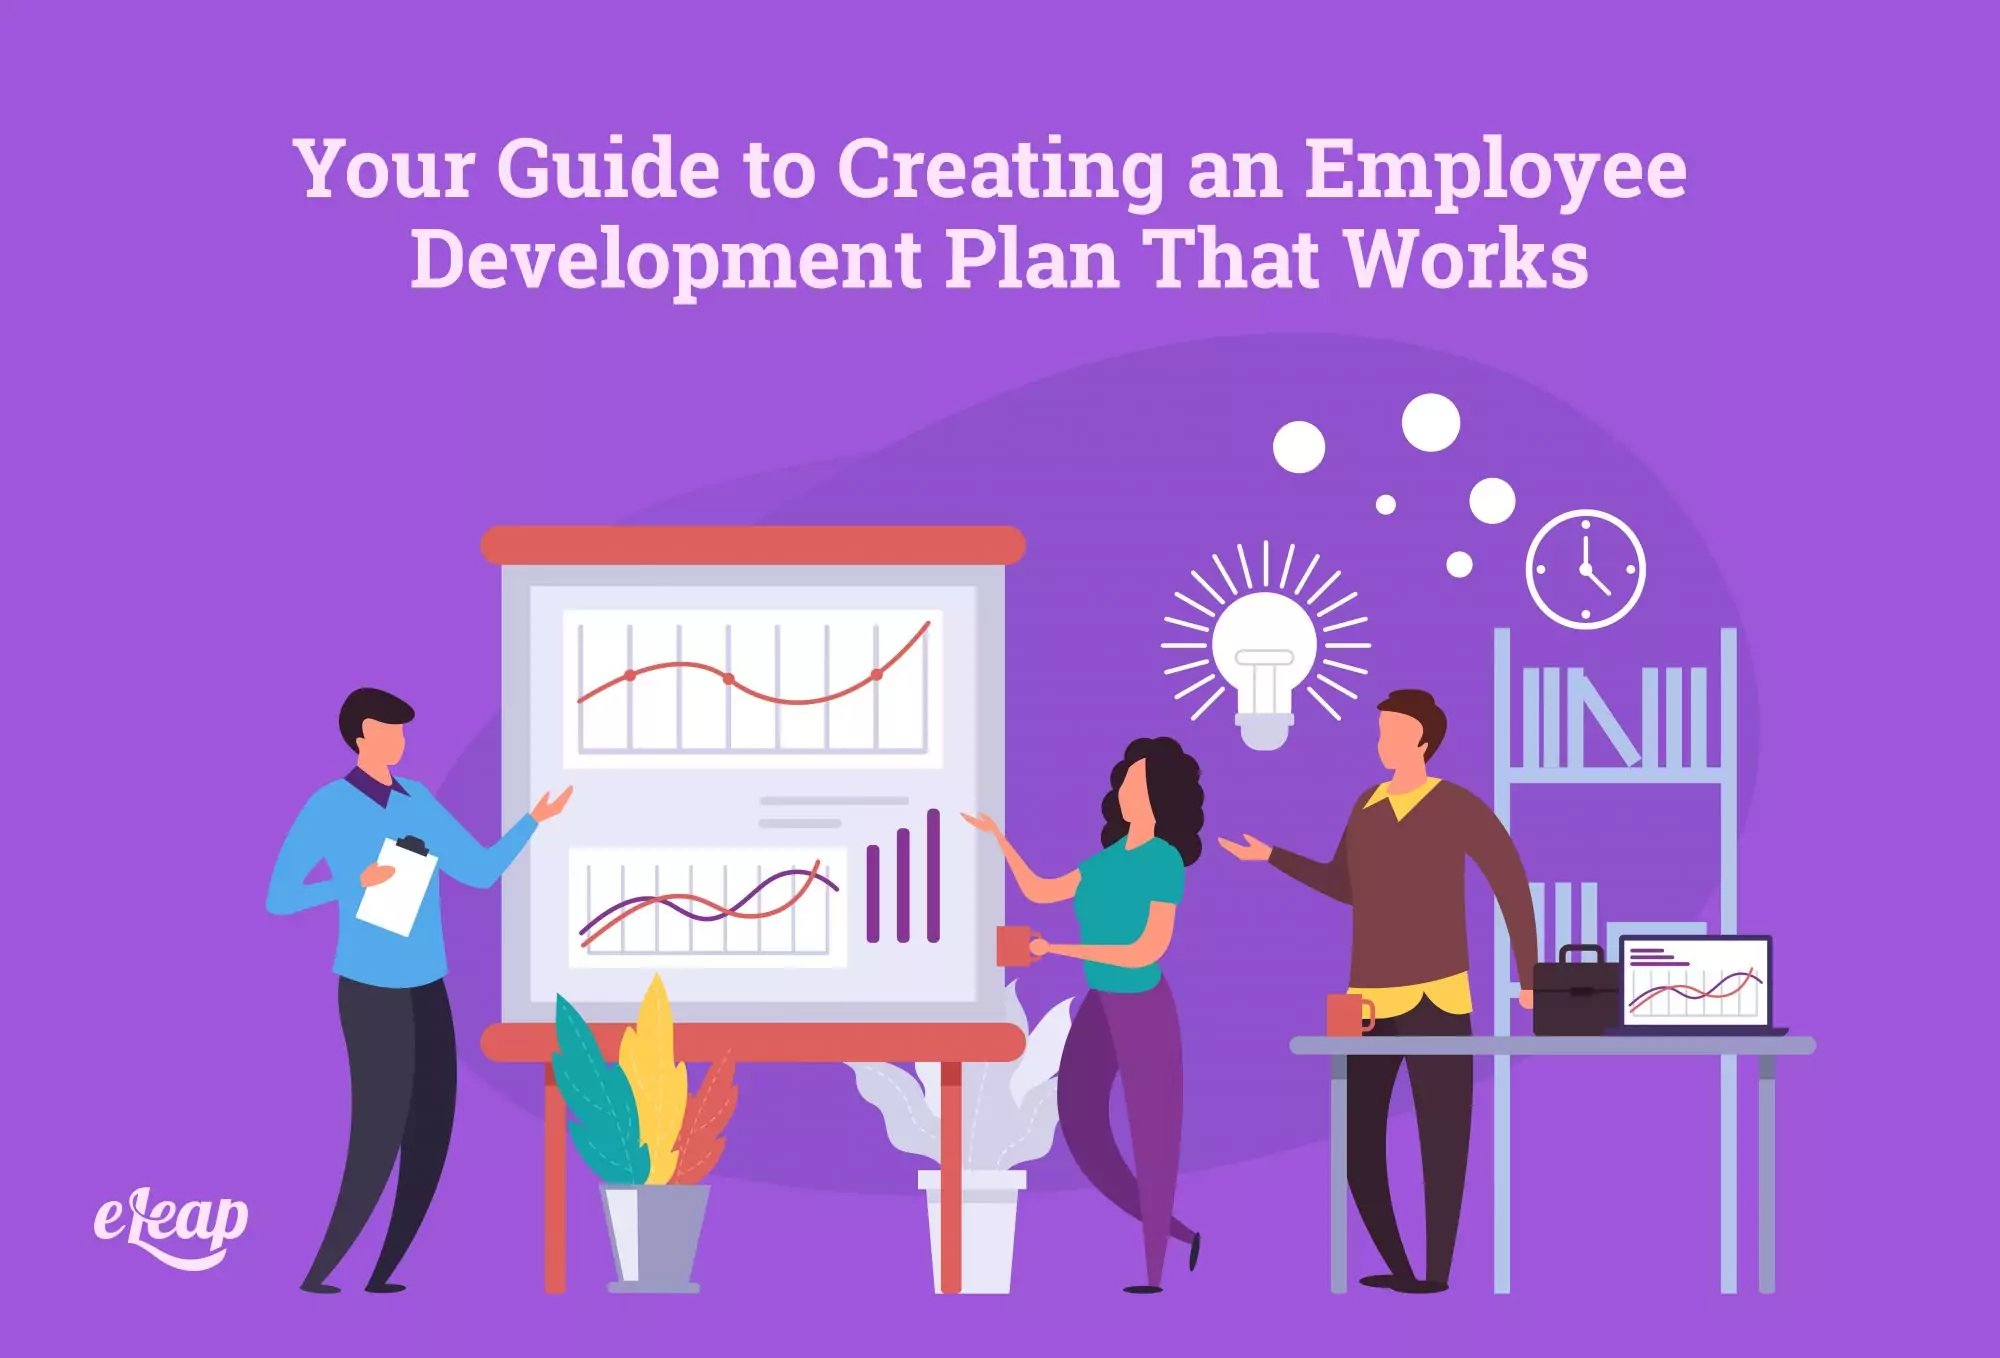 Your Guide to Creating an Employee Development Plan That Works